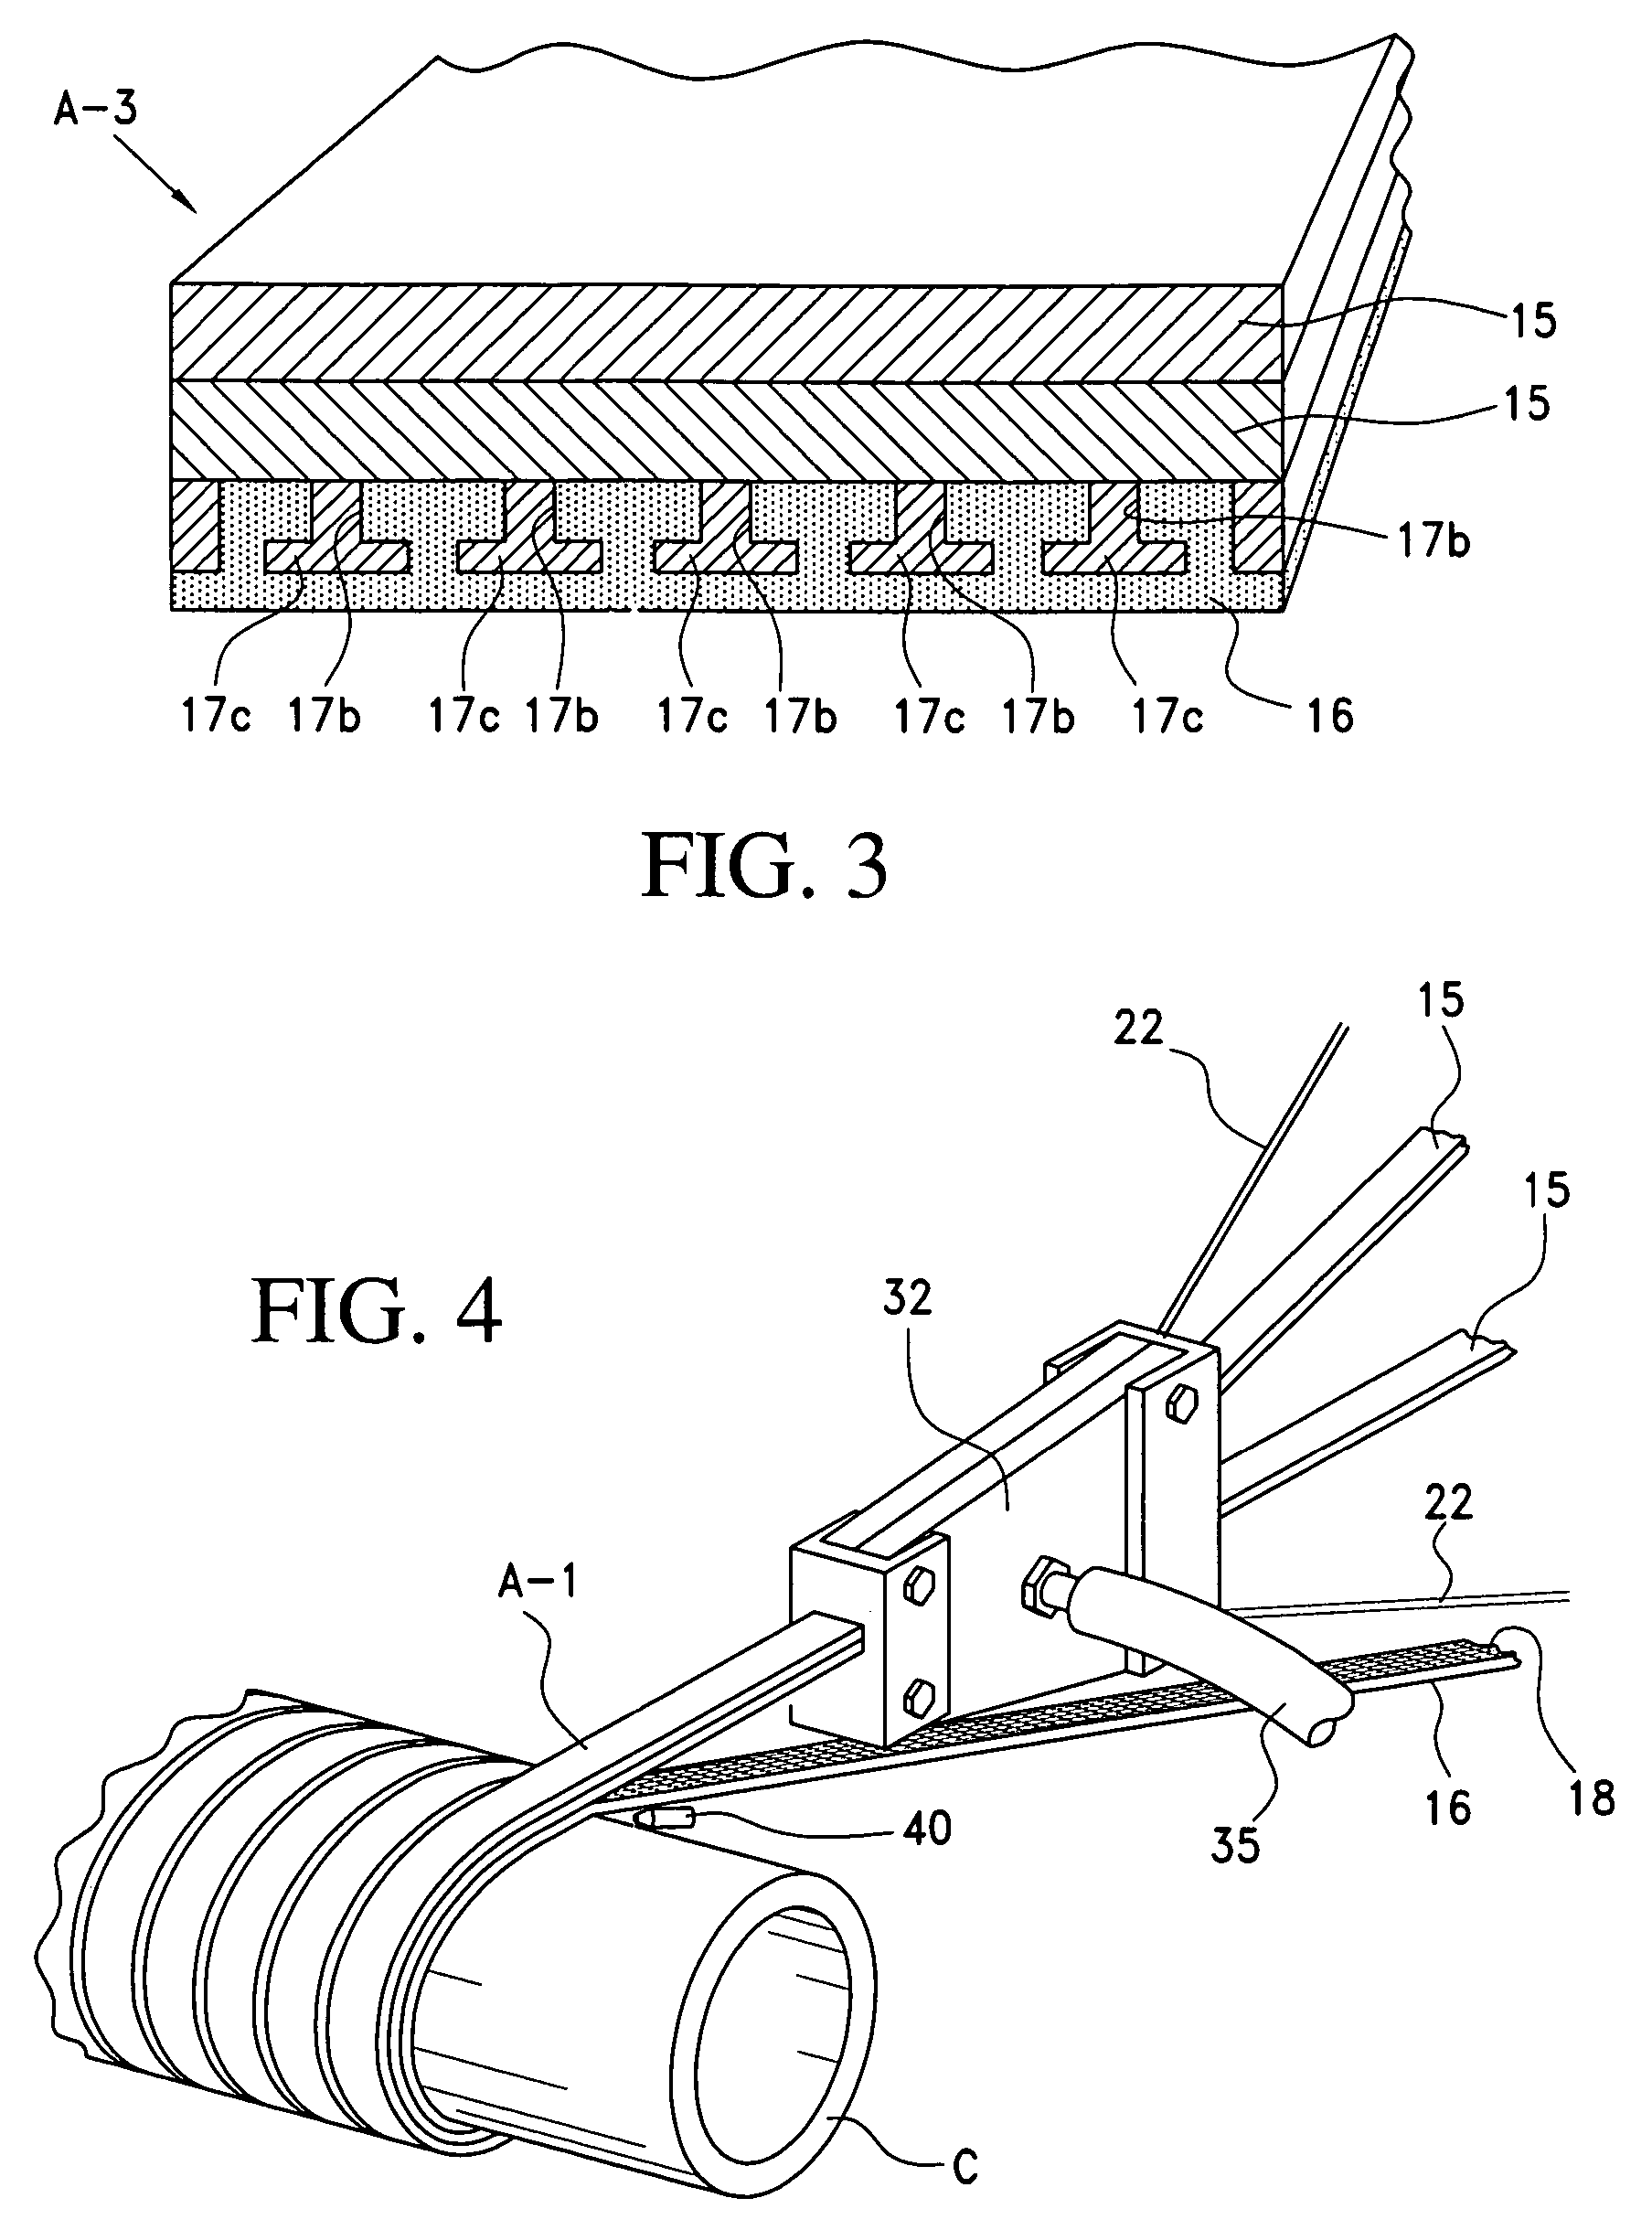 Anti-collapse system and method of manufacture